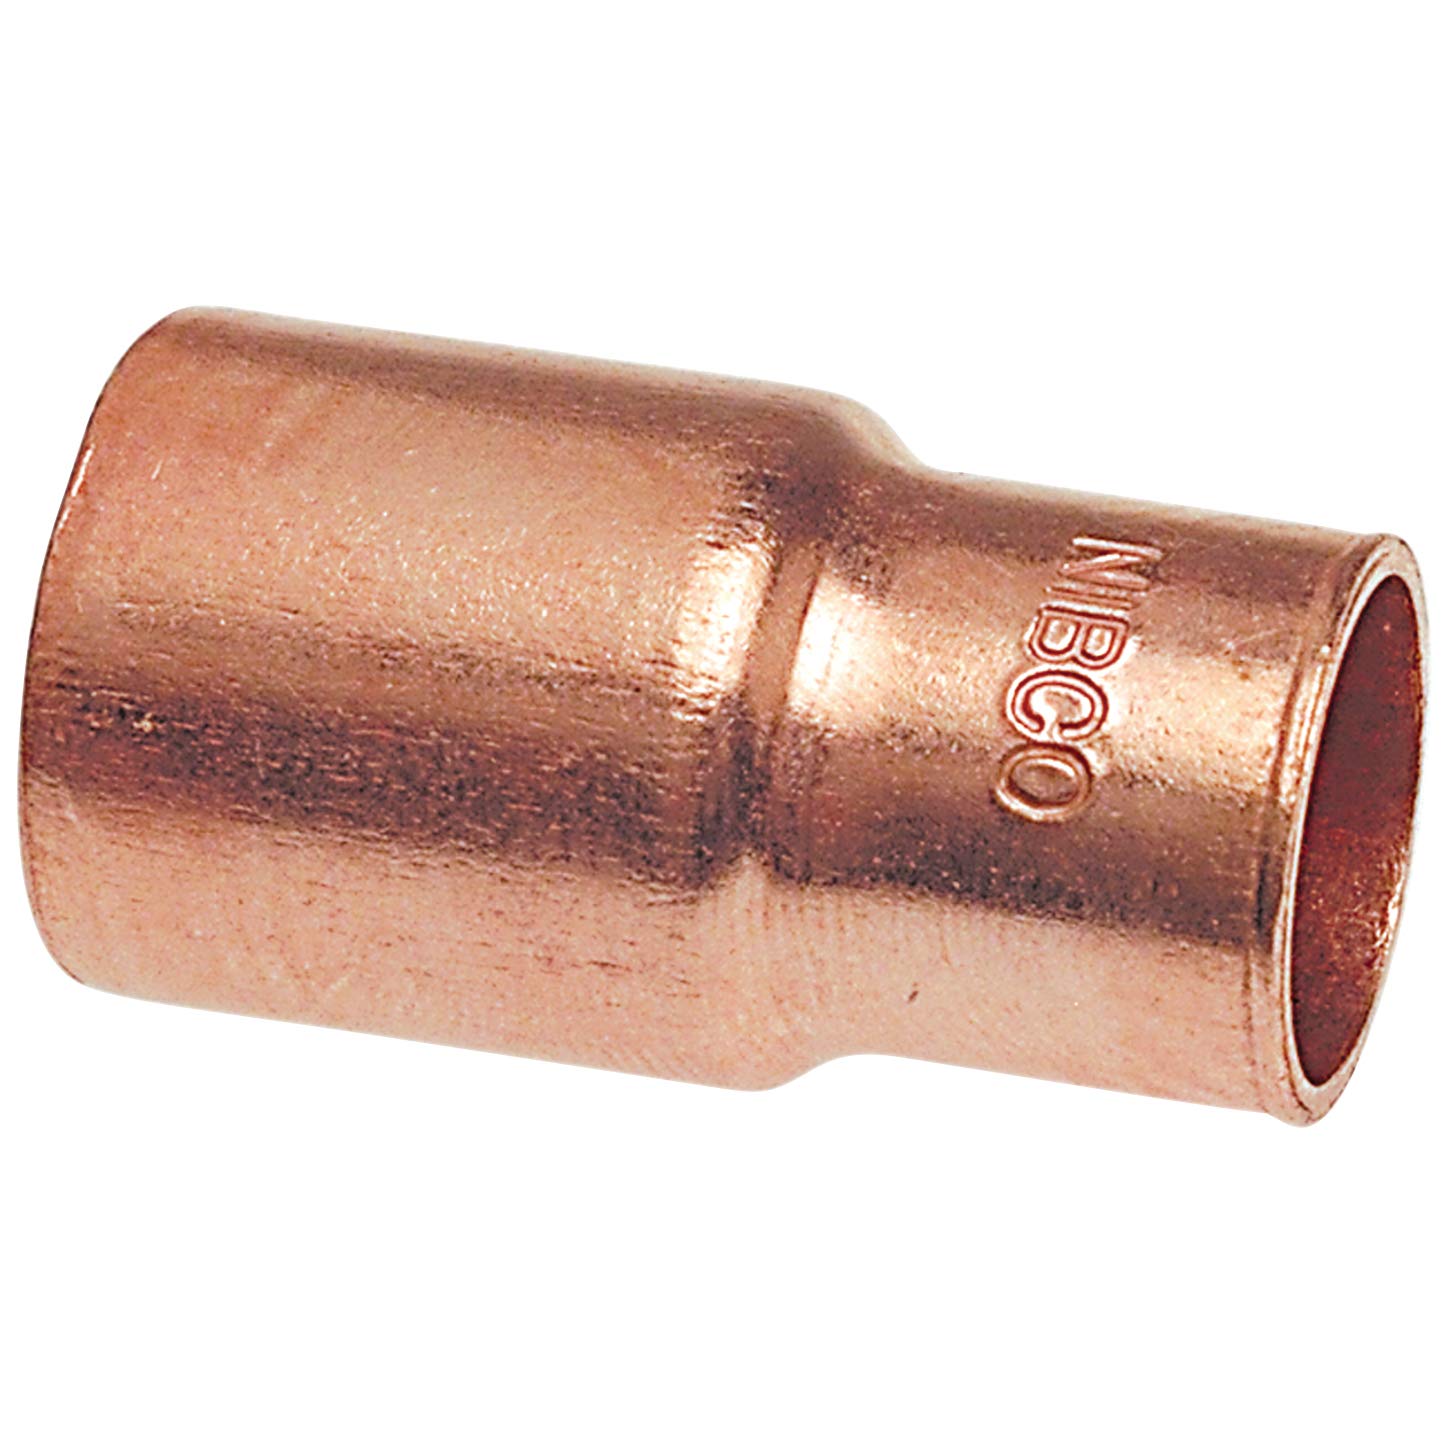 2-1/2" x 1 1/4" Fitting Reducer Ftg x C - Wrot Copper, 600-2